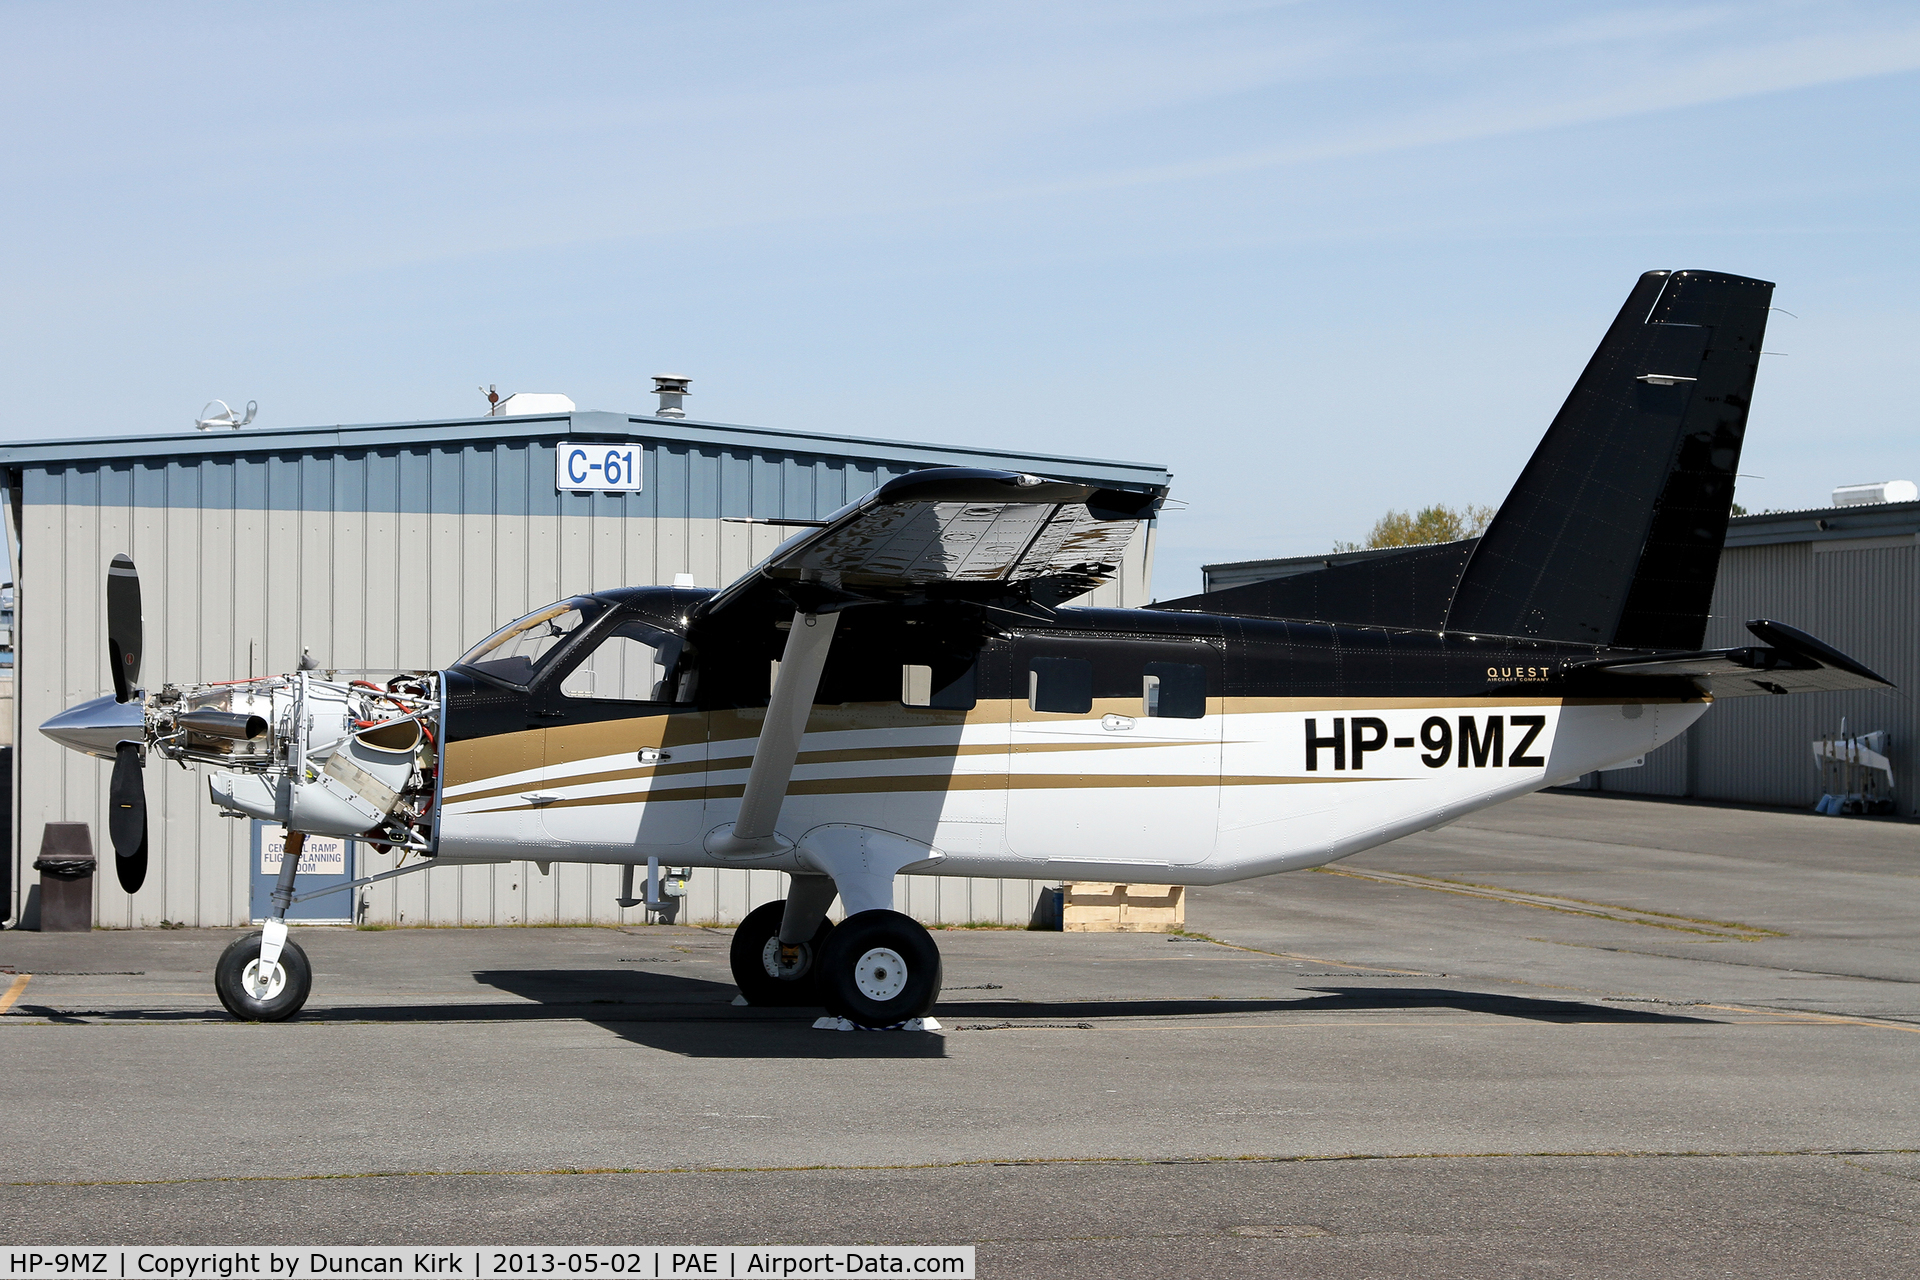 HP-9MZ, 2013 Quest Kodiak 100 C/N 100-0091, Fresh out of paint at Paine Field and awaiting its cowling